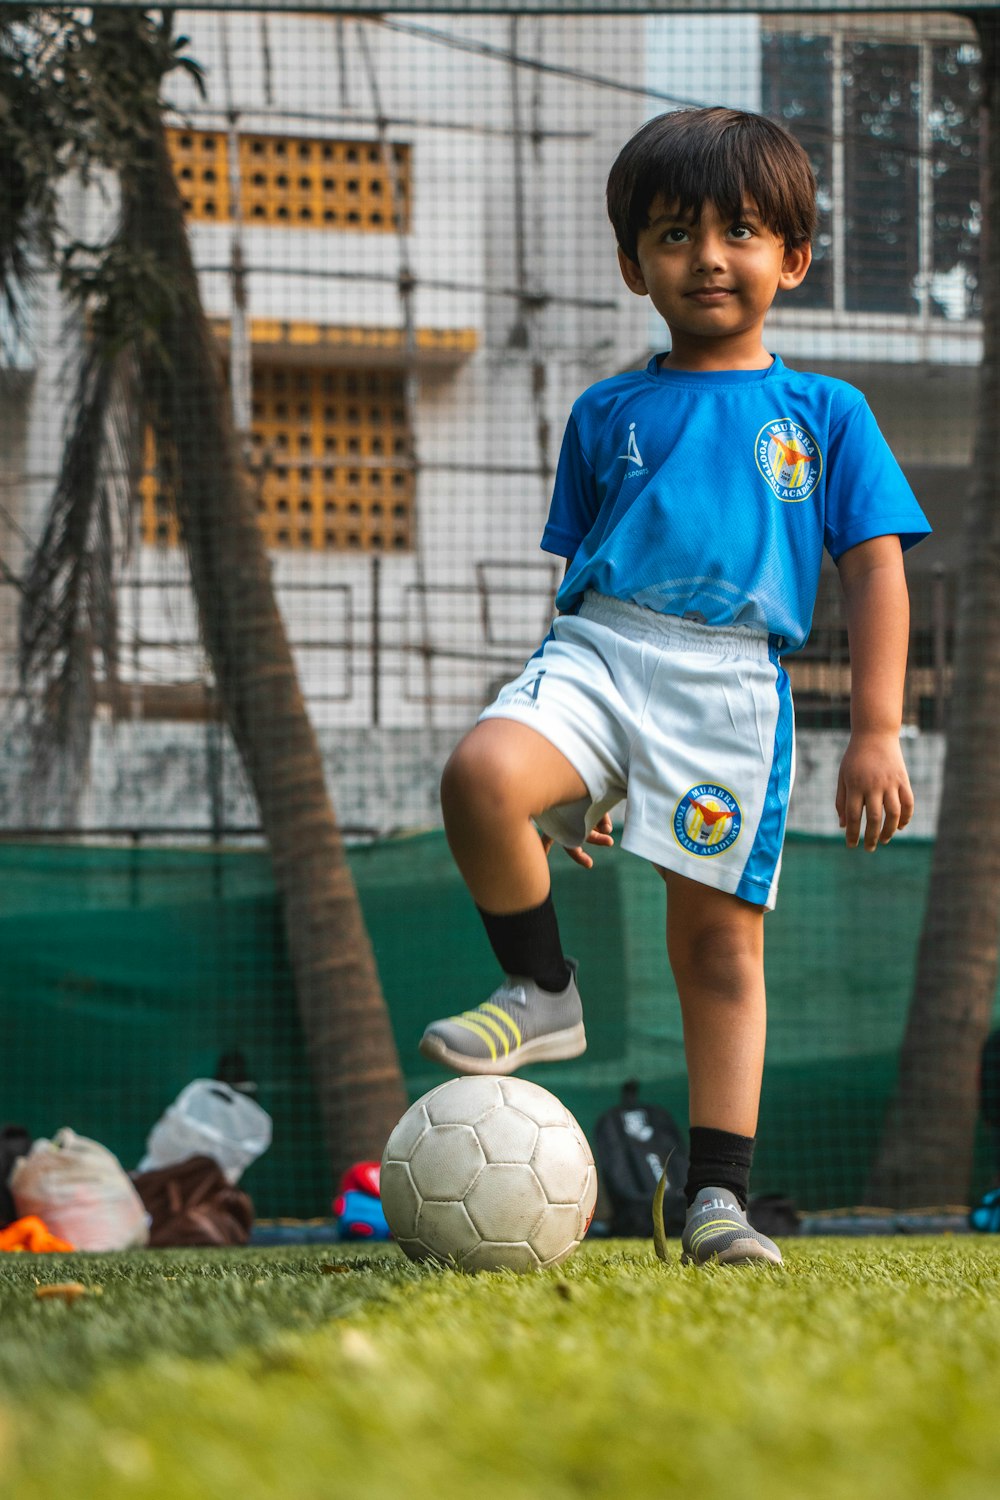 boy in blue soccer jersey shirt and white shorts playing soccer during daytime